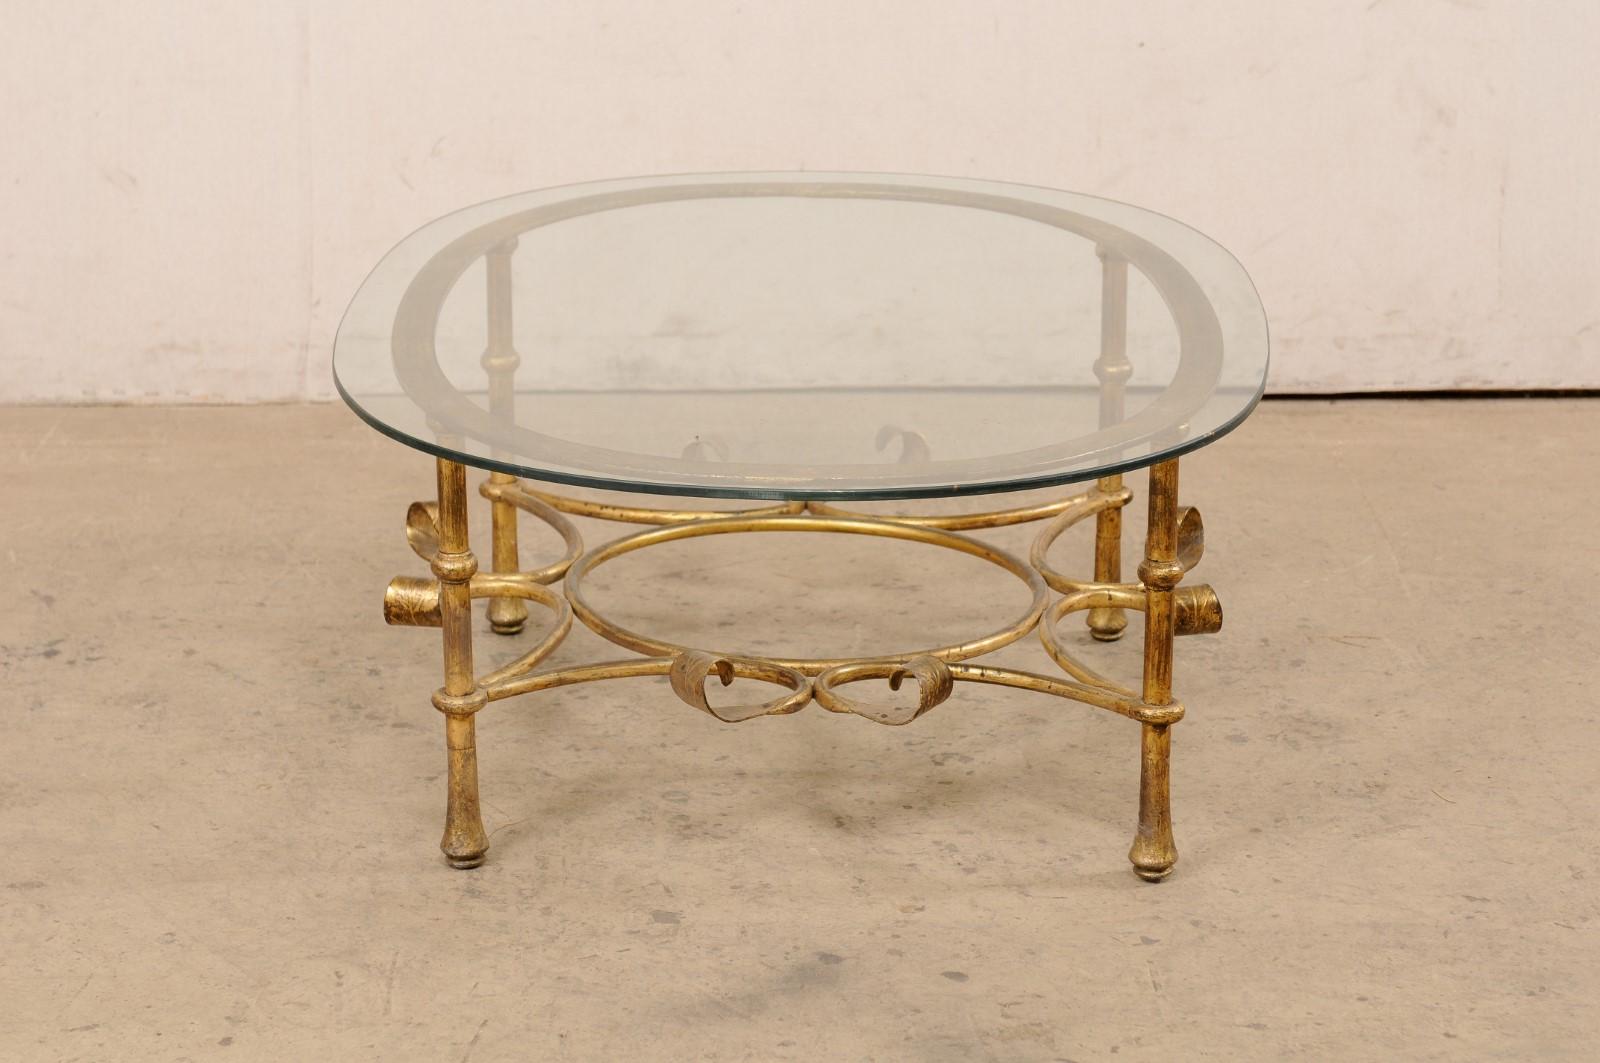 Spanish Oval Glass-Top Table with Iron Base (Gold Finish), Mid 20th C. 6